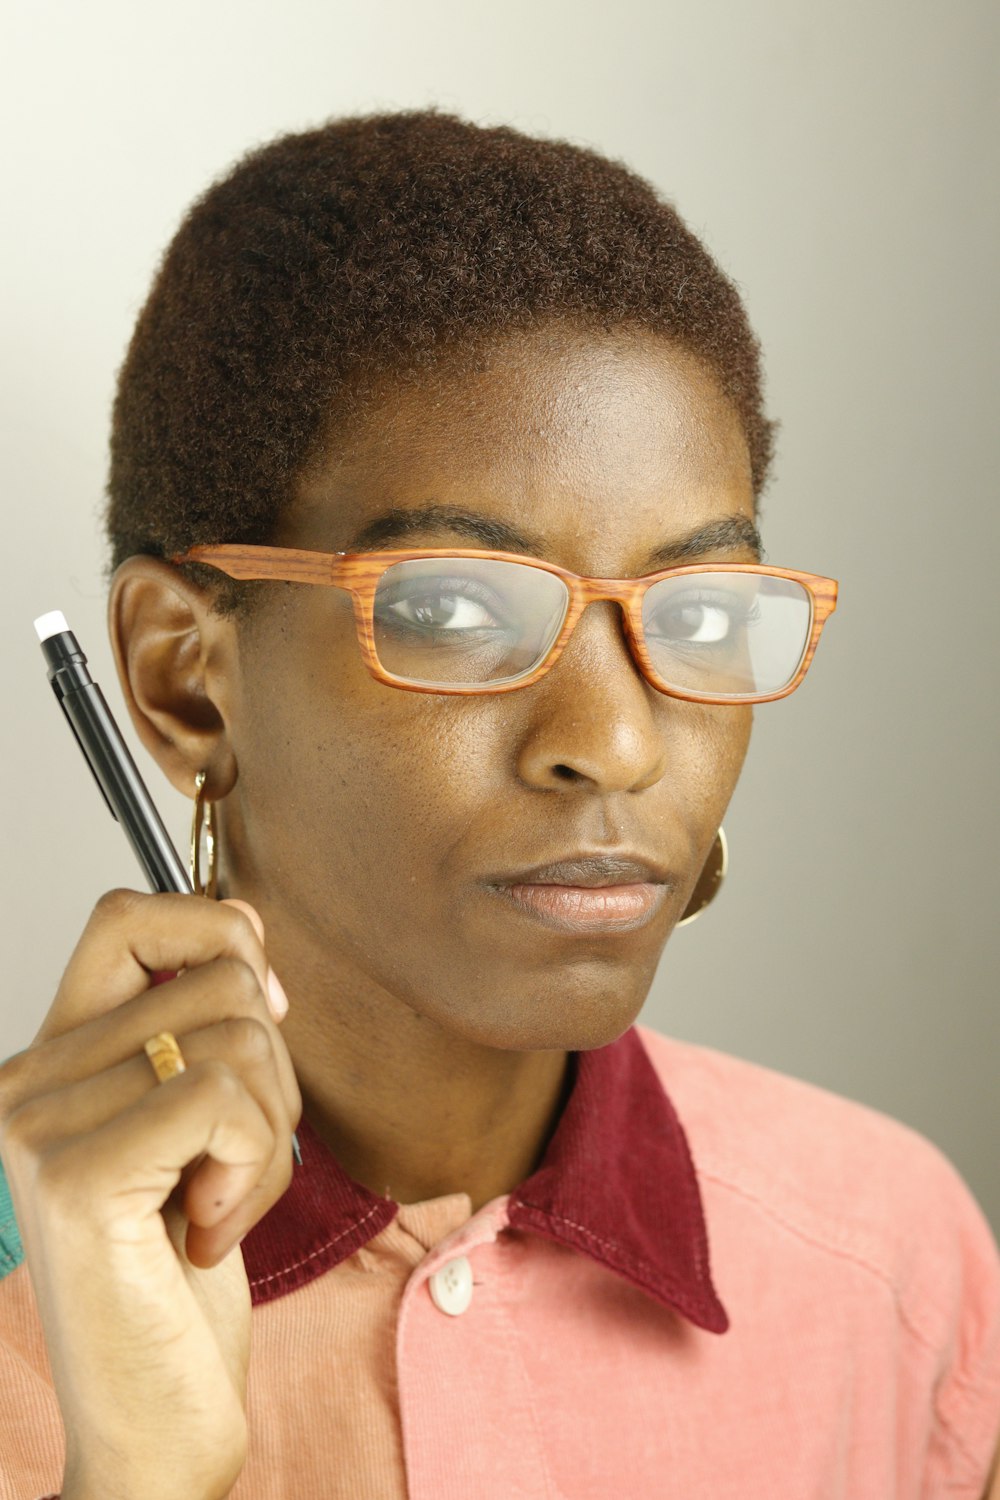 woman in red collared shirt wearing eyeglasses holding pen